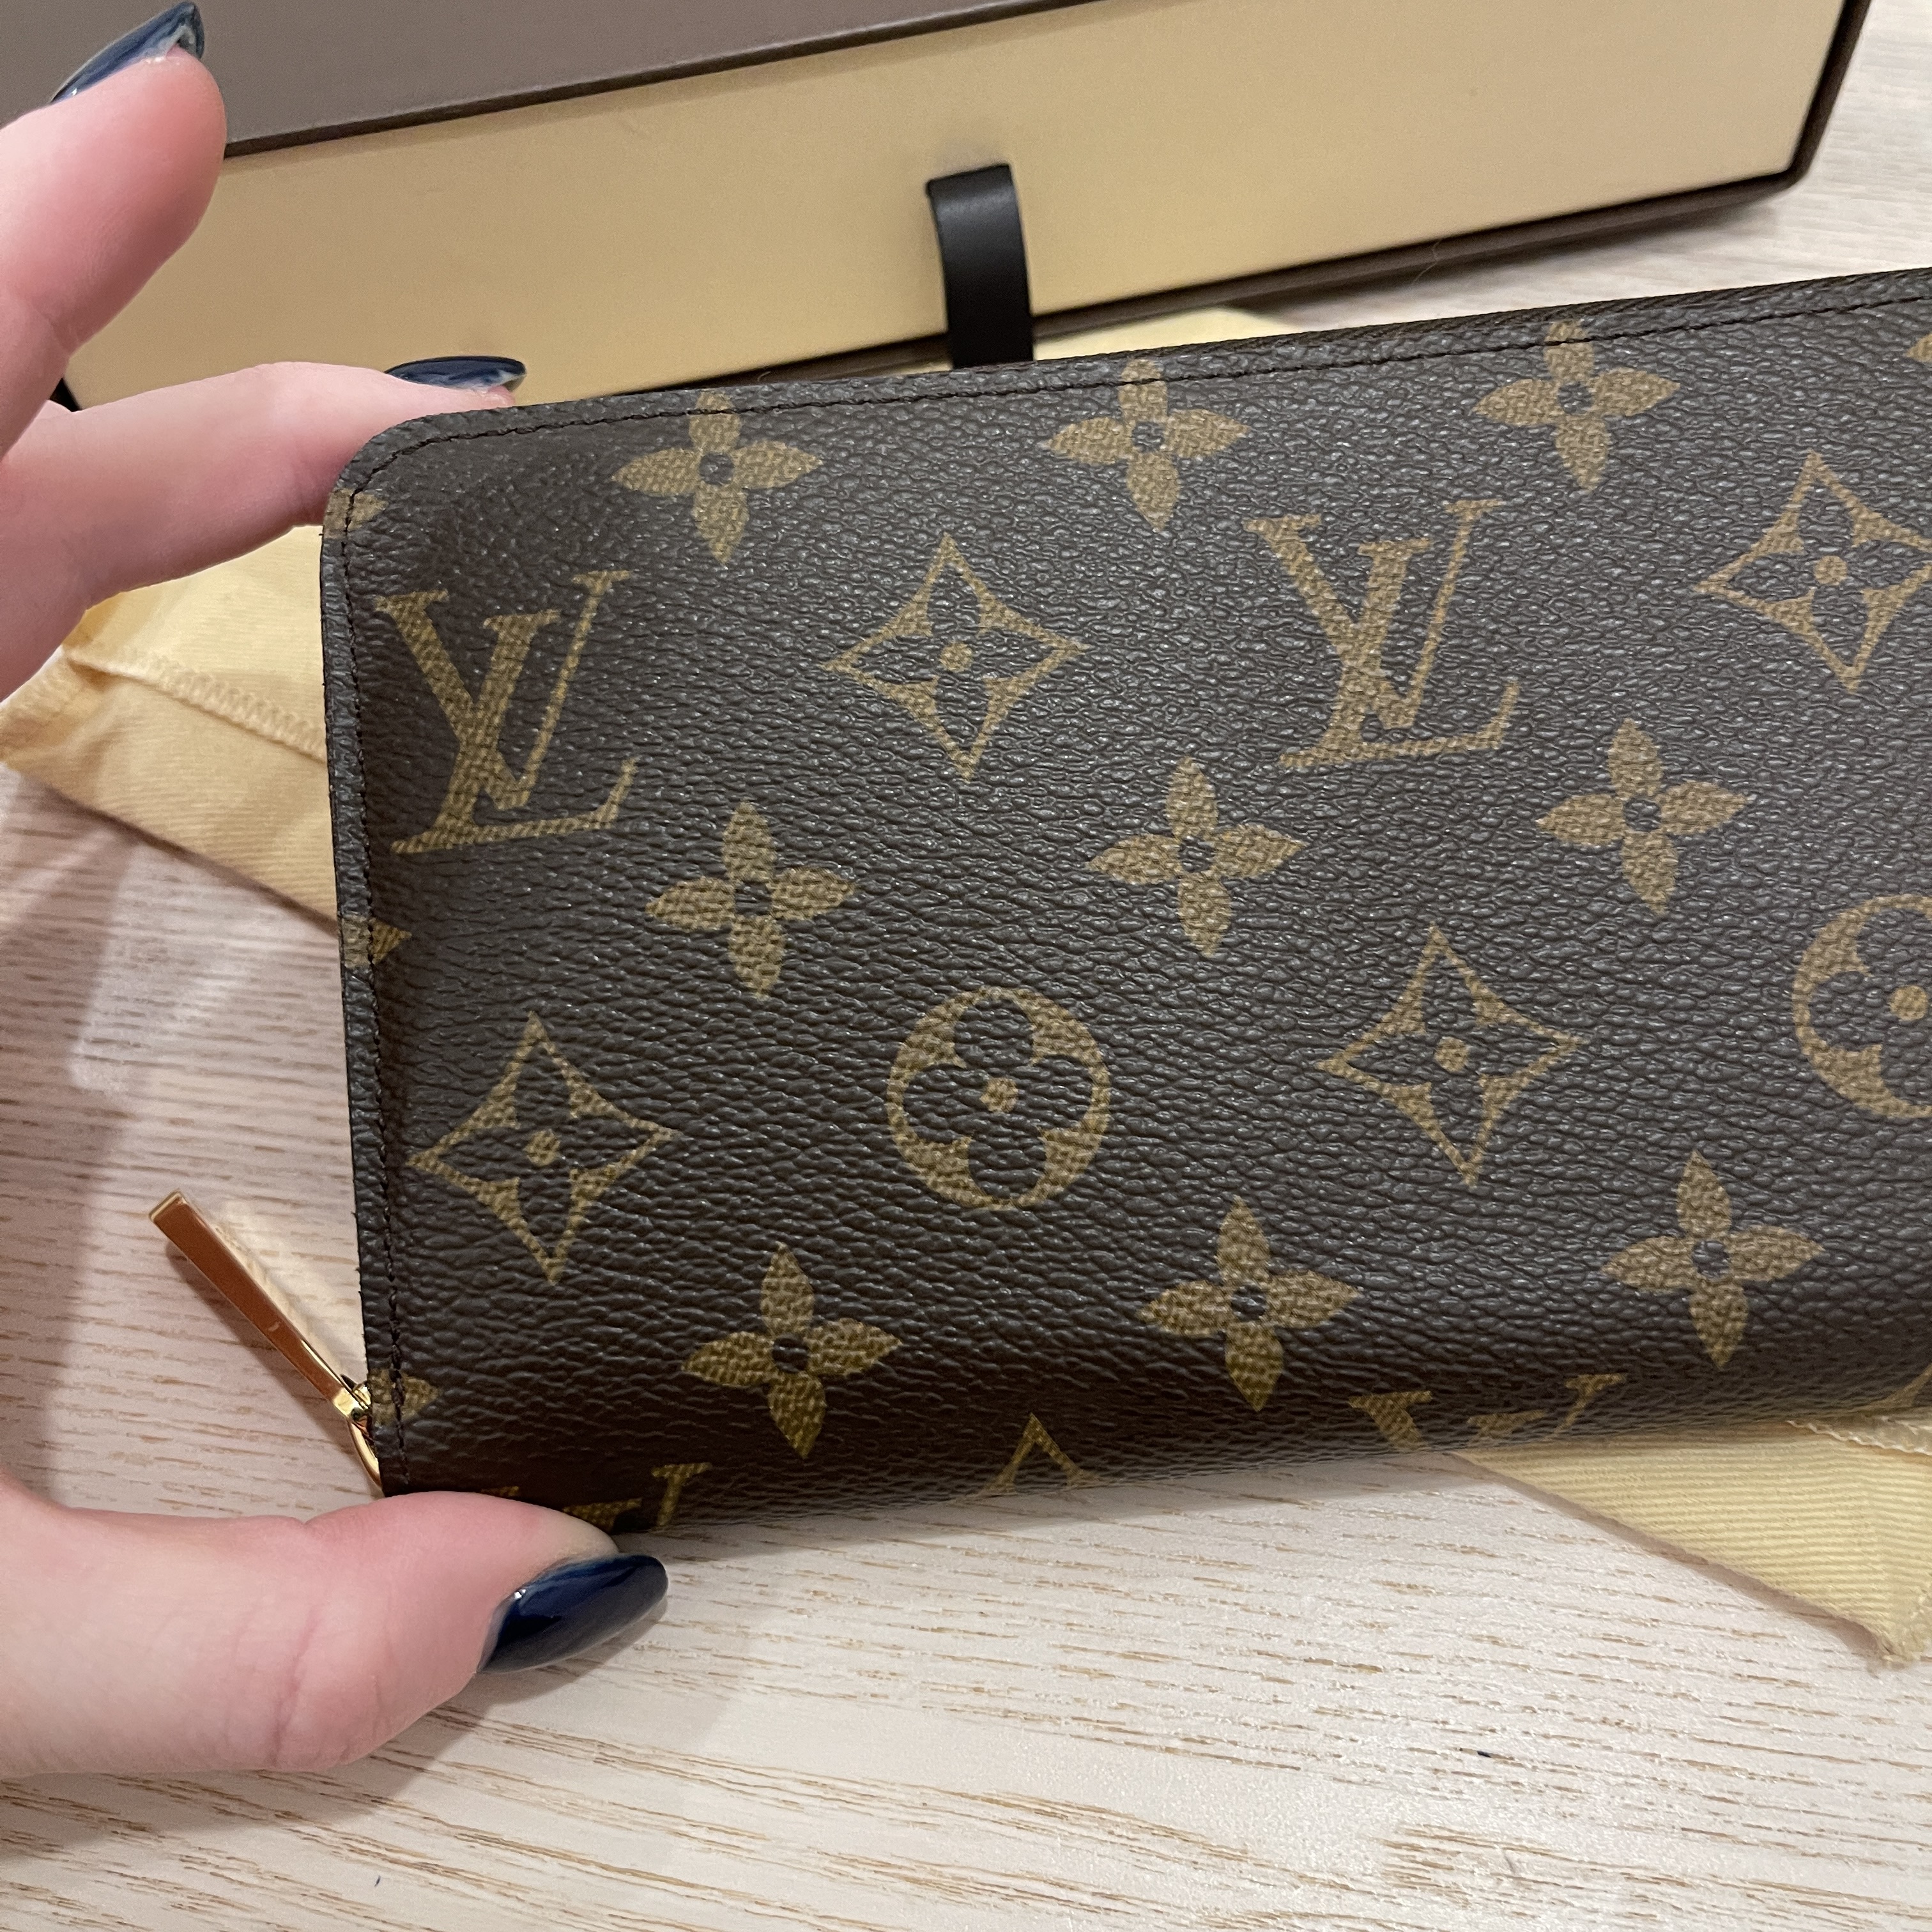 Louis Vuitton Monogram Coquelicot Adele Wallet - Preowned LV Wallets